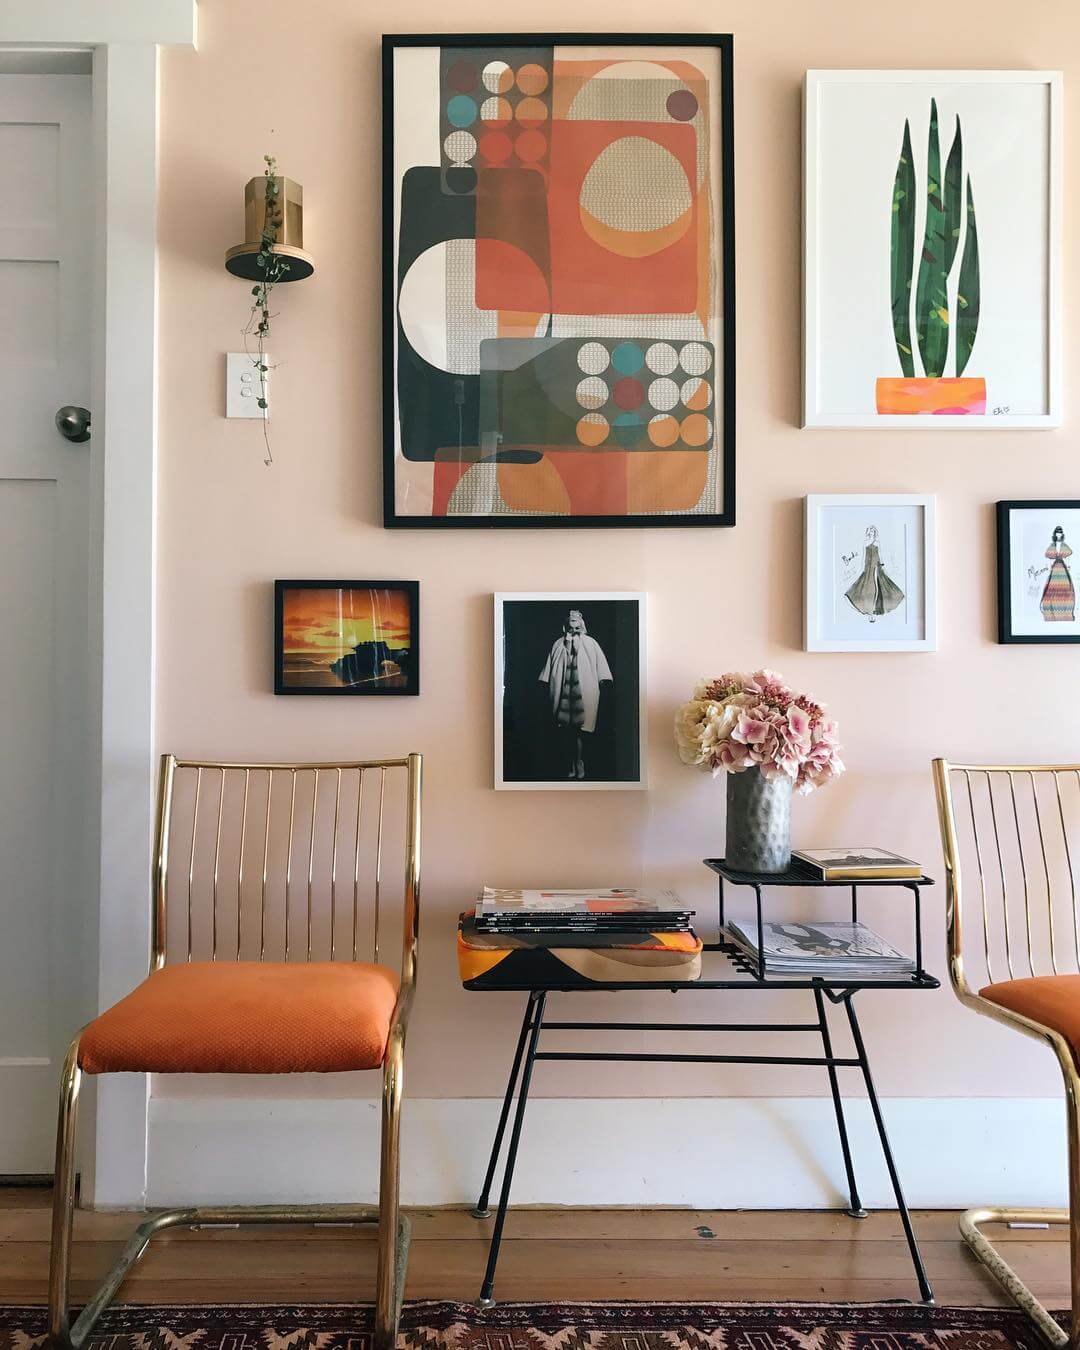 Putting together a gallery wall? Here are 7 lesser known tips you haven't heard of but need to know. Photo credit: @michellematangi via Instagram